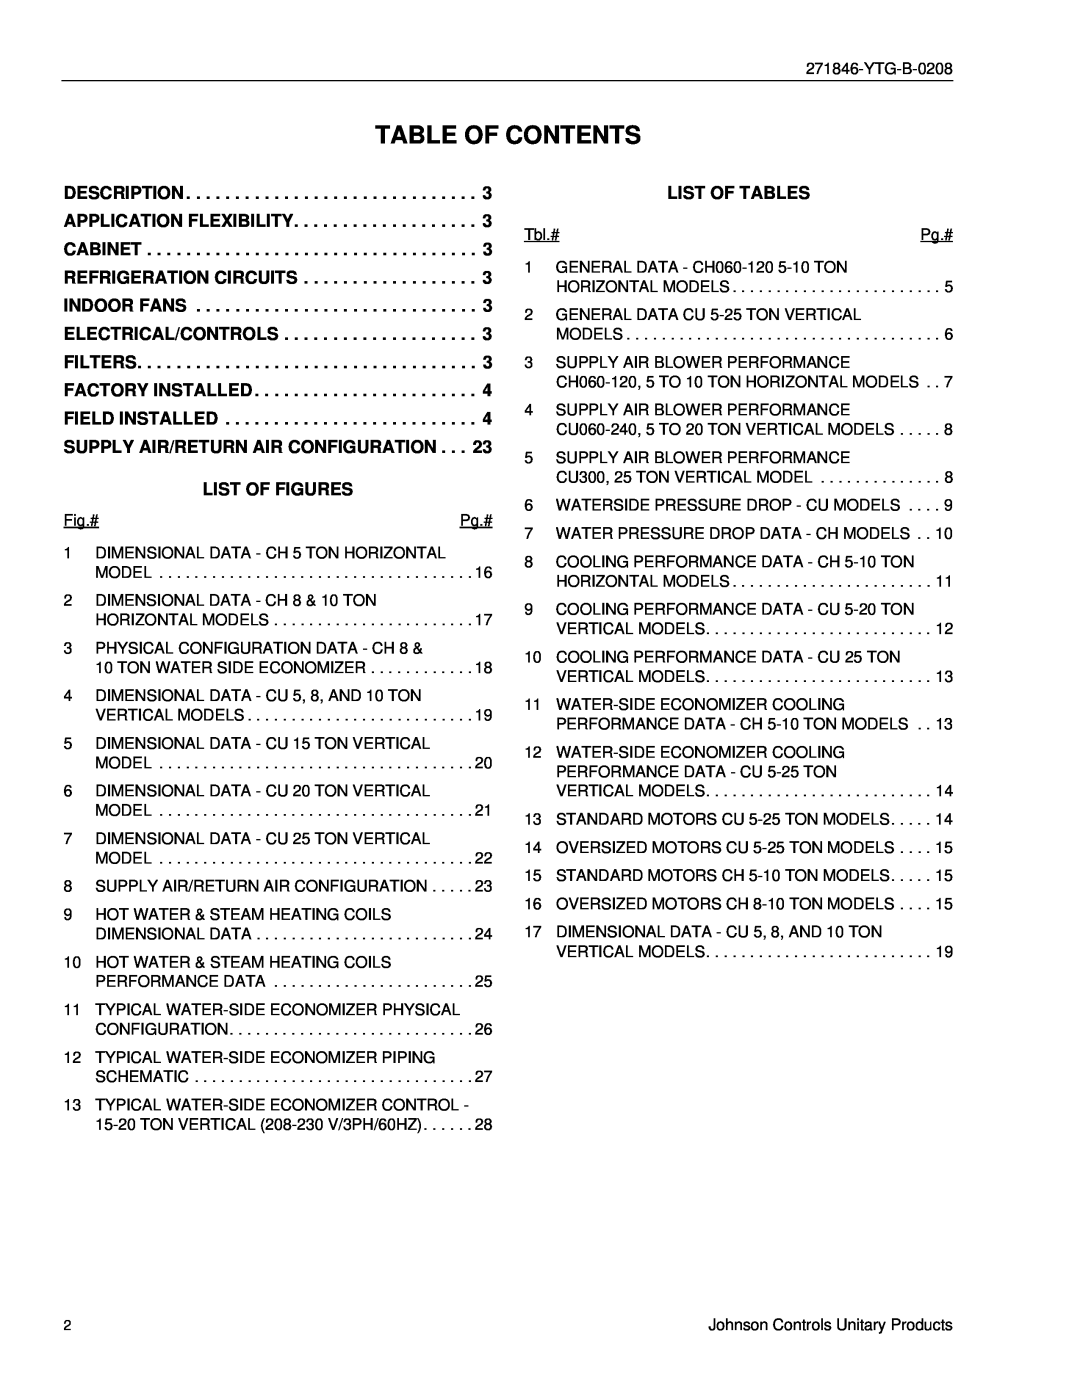 York CU060 - 300 manual Table Of Contents, Supply Air/Return Air Configuration, List Of Figures, List Of Tables 